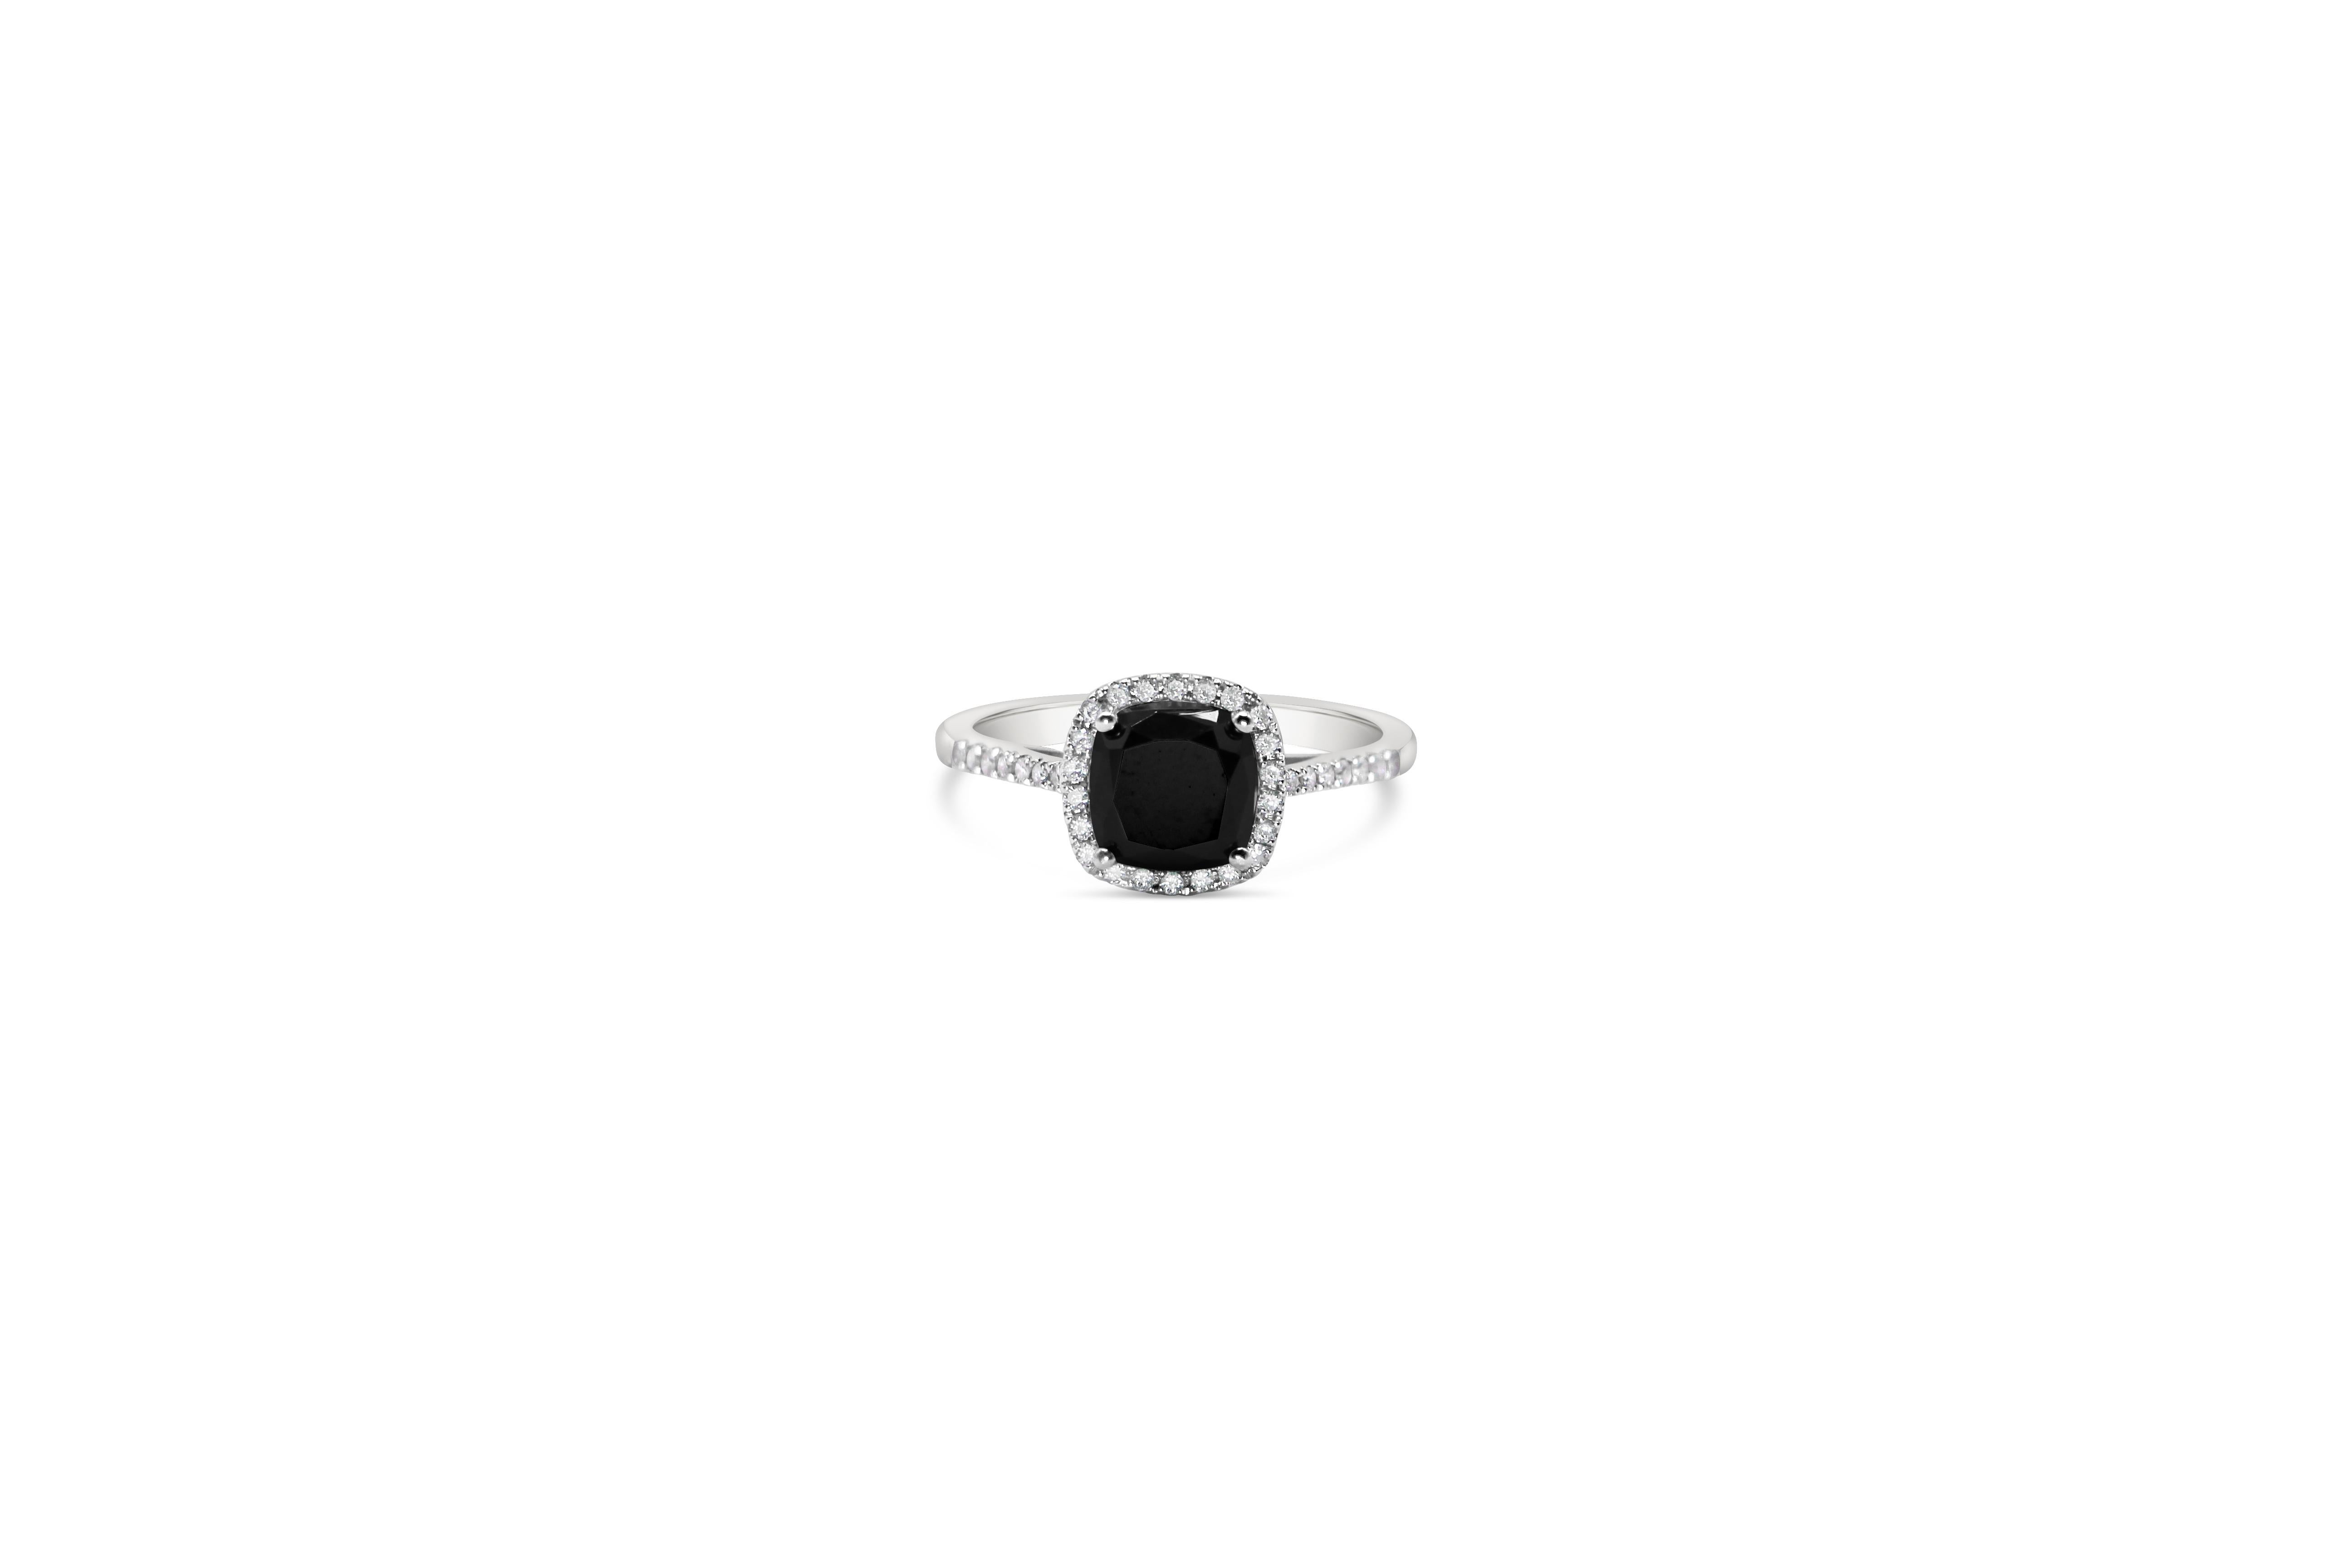 Black Diamond Cushion Cut Solitaire Ring in 18Kt  with White Diamonds Brilliant Cut. 
A unique handmade ring in 18Kt white gold. The main stone in the center is a rare  Black Diamond 1.85ct cushion cut which is set among four prongs. White diamonds